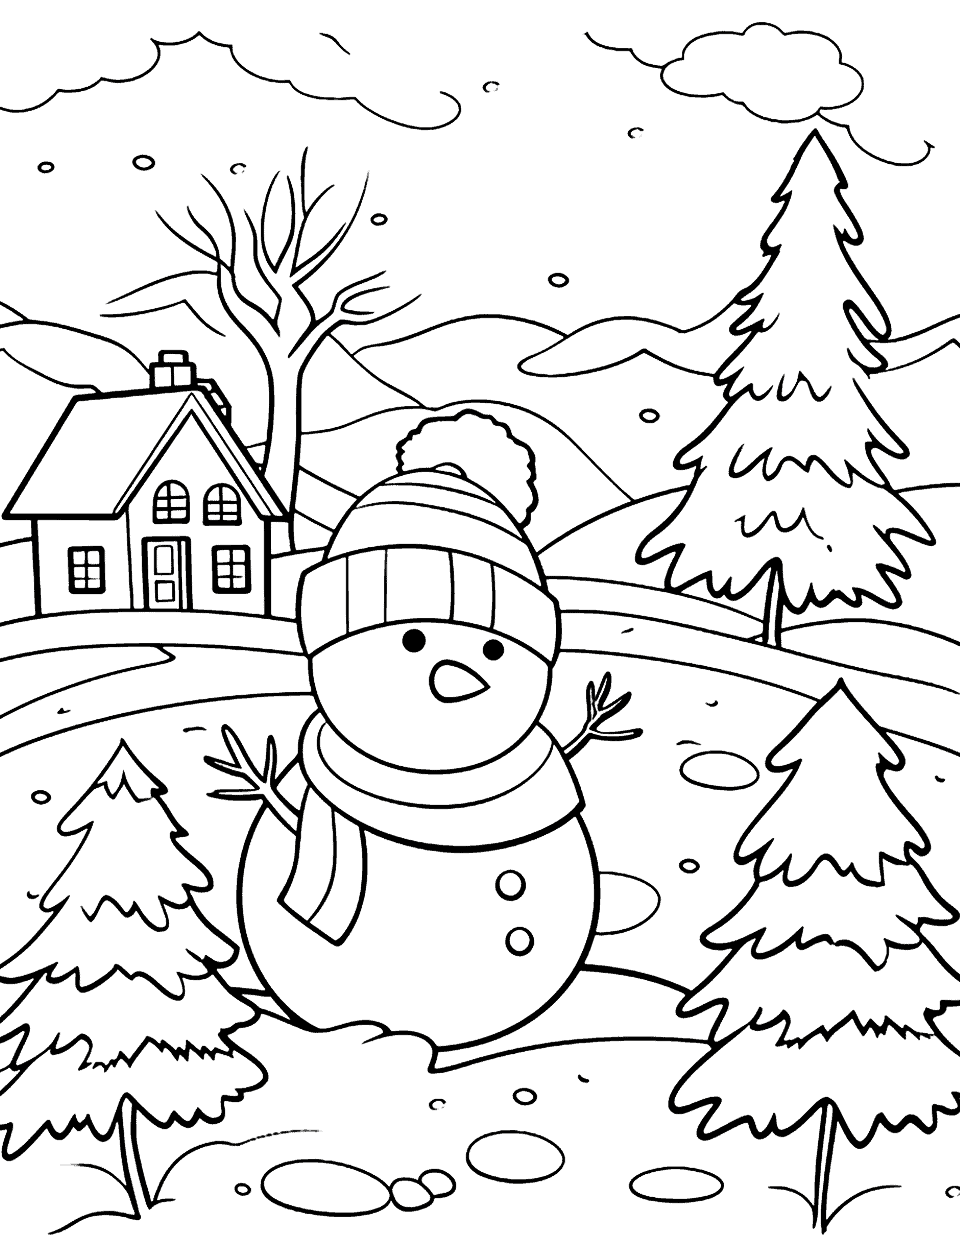 Adorable Winter Scene Coloring Page - A snowy landscape simplified for kids to fill in with color.